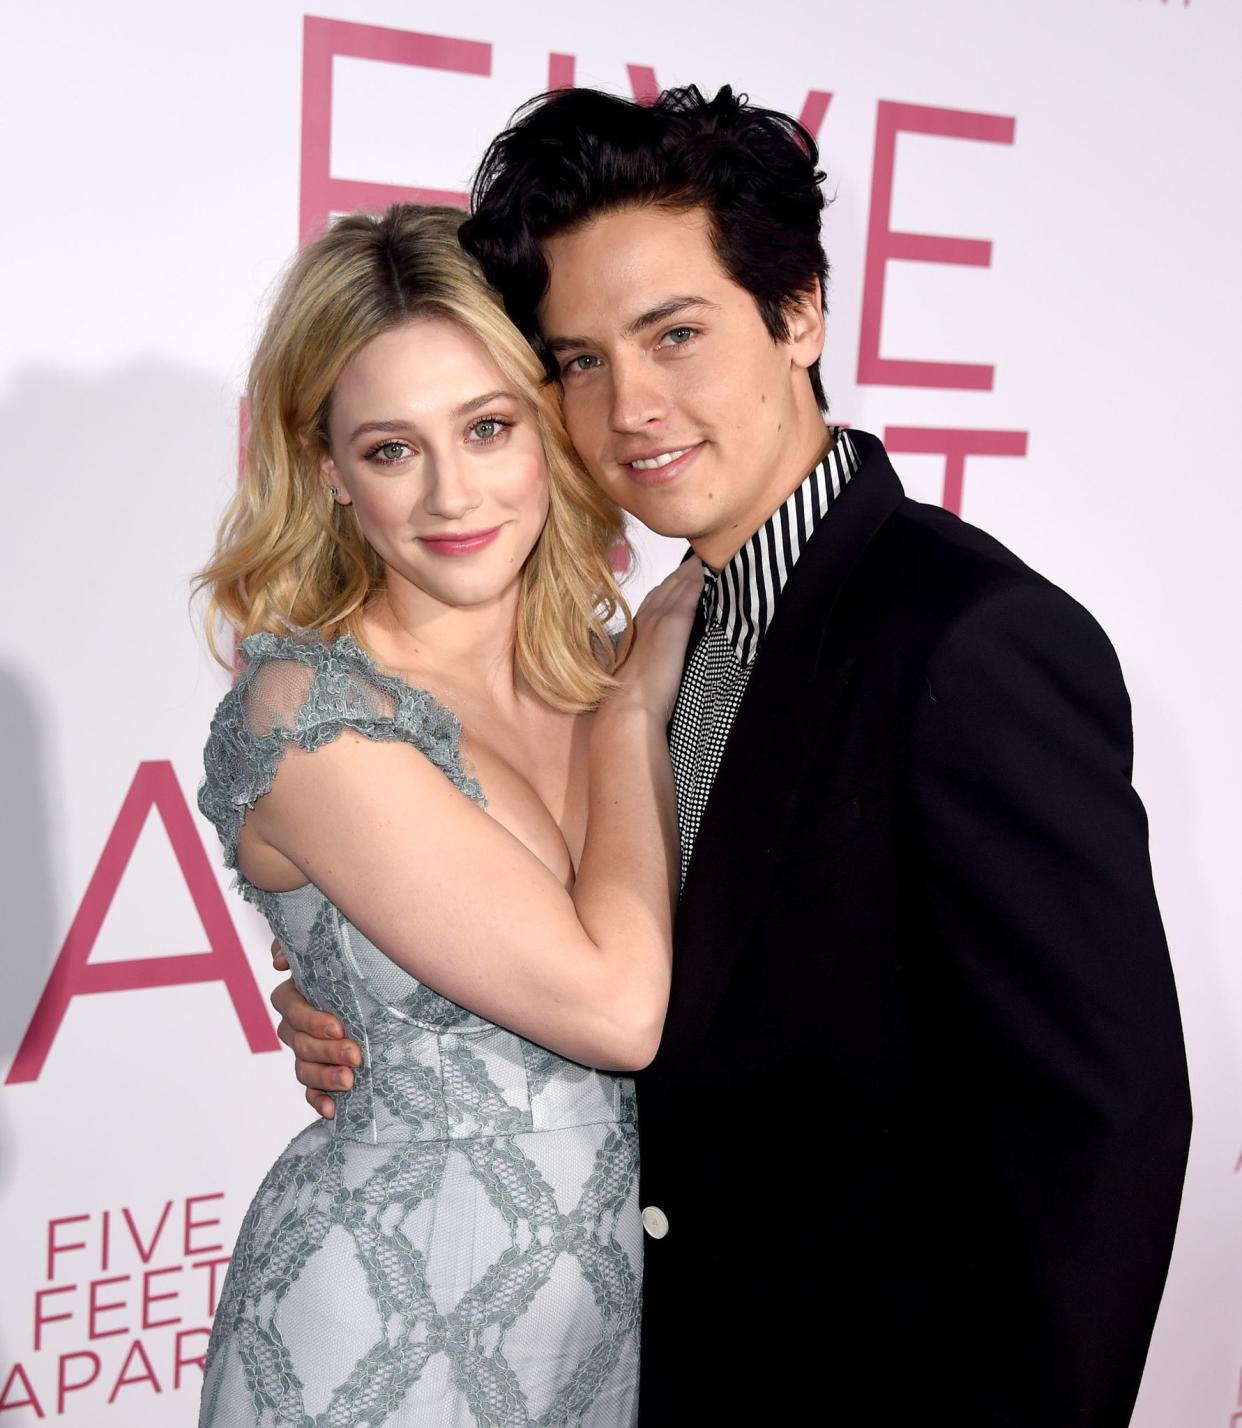 After over a year of public speculation, Cole Sprouse confirmed on Aug. 19, 2020 that he and Lili Reinhart ended their relationship in March 2020. “Lili and I initially separated in January of this year, deciding to more permanently split in March,” the “Riverdale” actor captioned a photo of Lili on Instagram. “What an incredible experience I had, I’ll always feel lucky and cherish that I had the chance to fall in love. I wish her nothing but the utmost love and happiness moving forward. All I’ll say about it, anything else you hear doesn’t matter.” The couple was initially thought to have ended things in July 2019 and never publicly addressed it. They first got together back in July 2017.